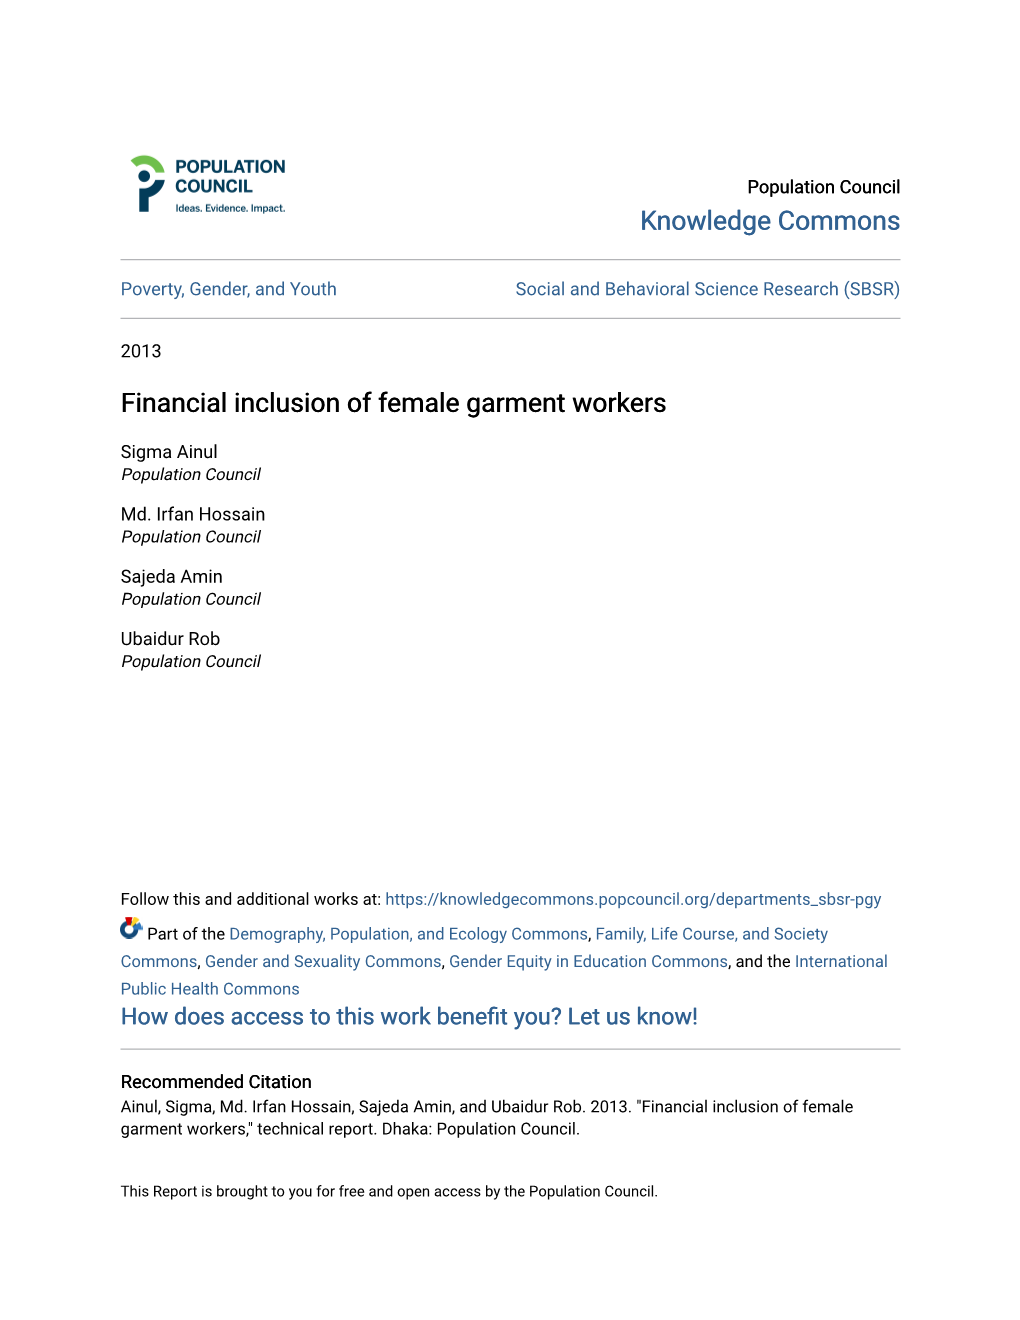 Financial Inclusion of Female Garment Workers